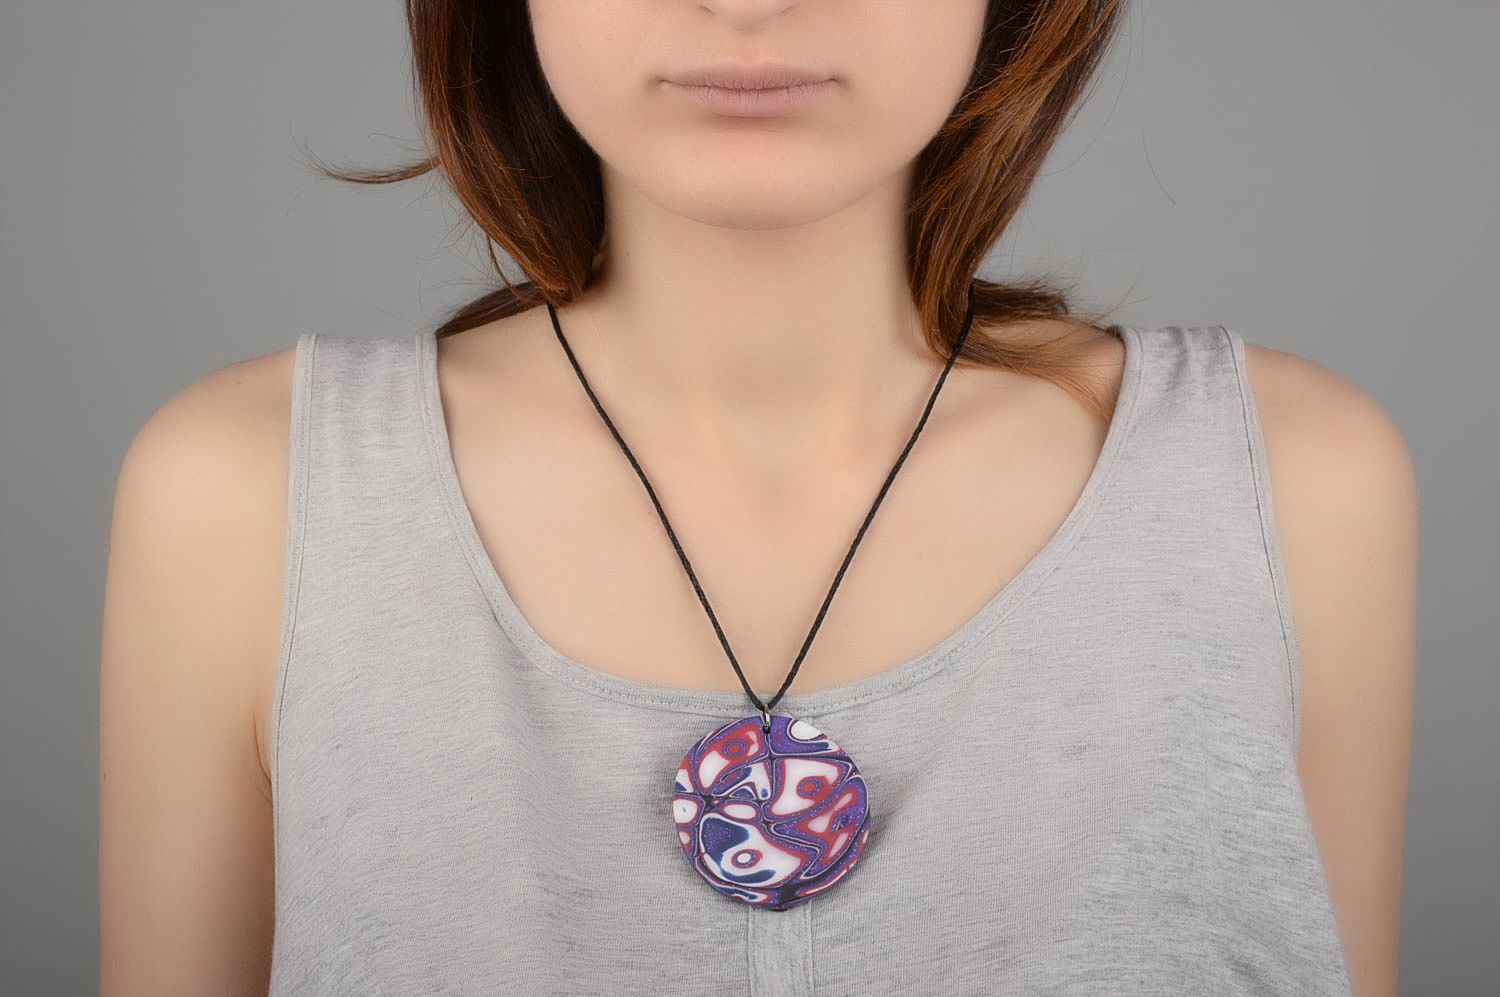 Fashion necklace handcrafted jewelry designer accessories polymer clay gift idea photo 1